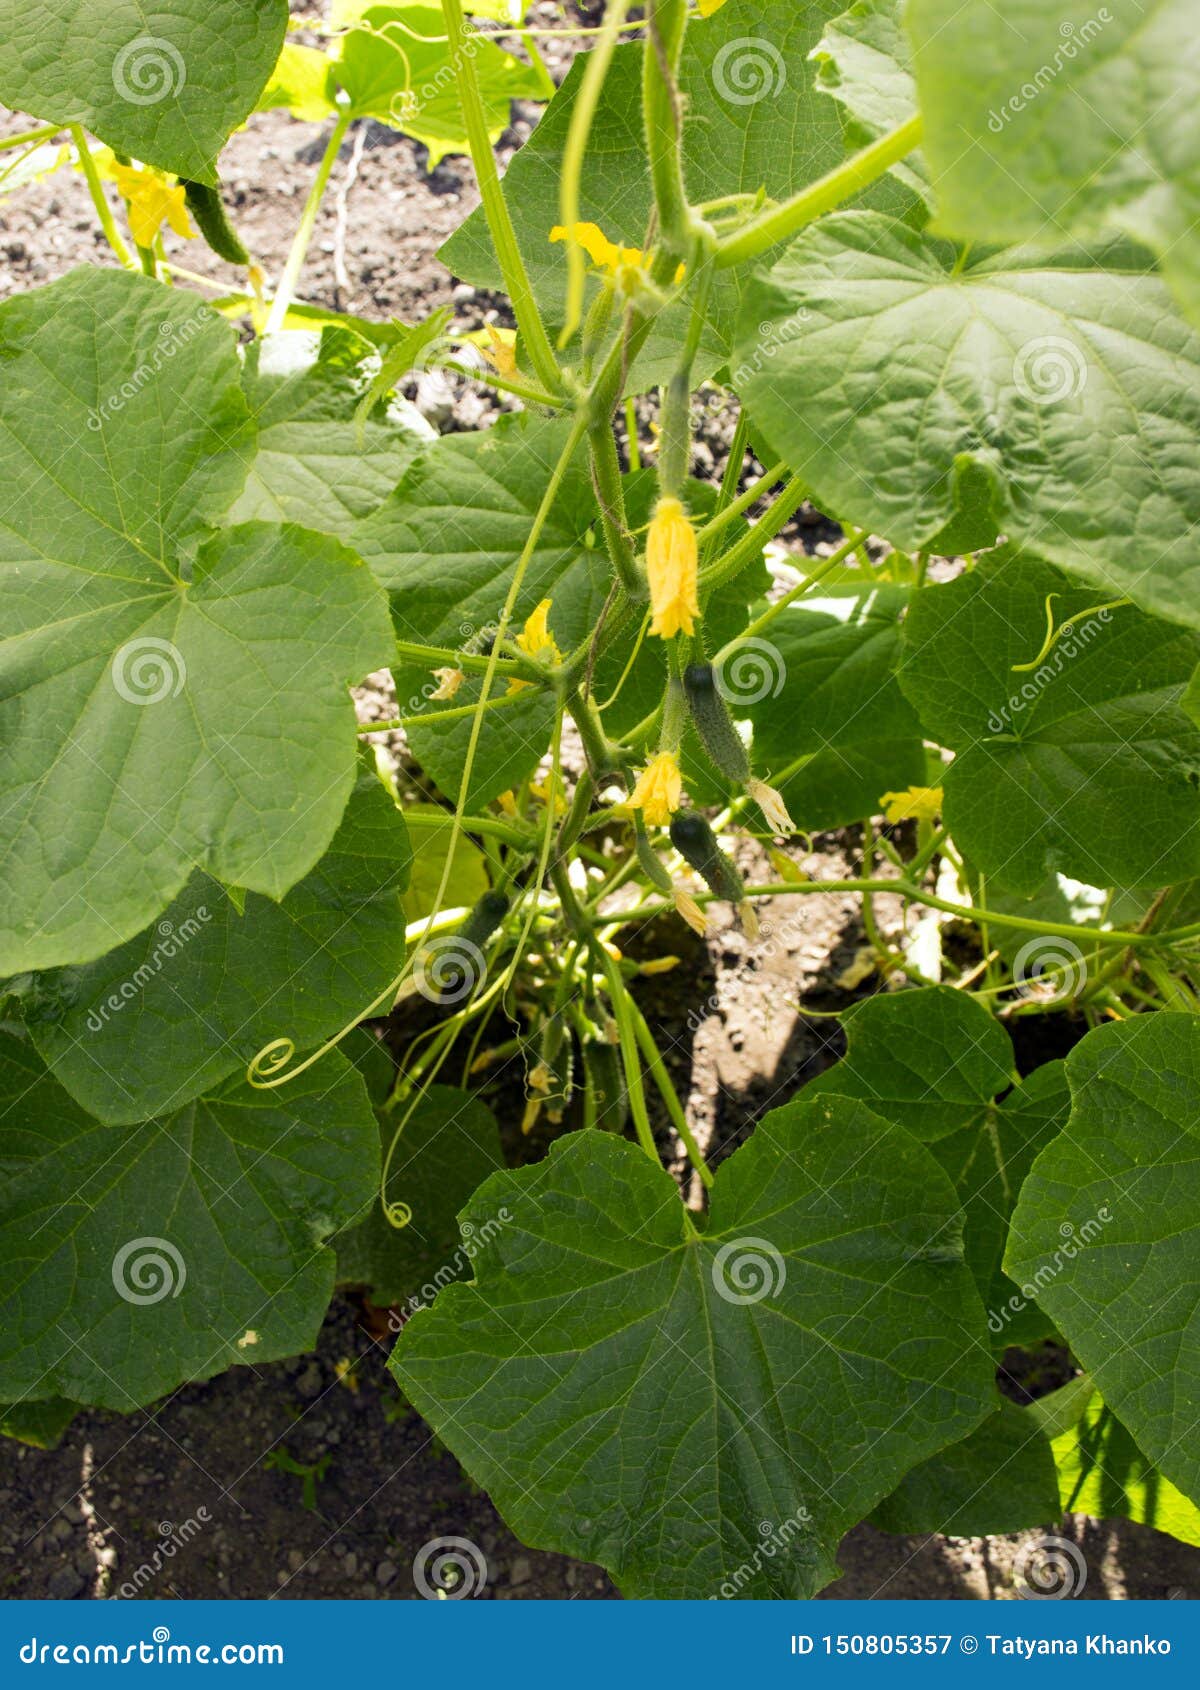 ..green Small Cucumbers Hang on a Branch in a Greenhouse. Crop of